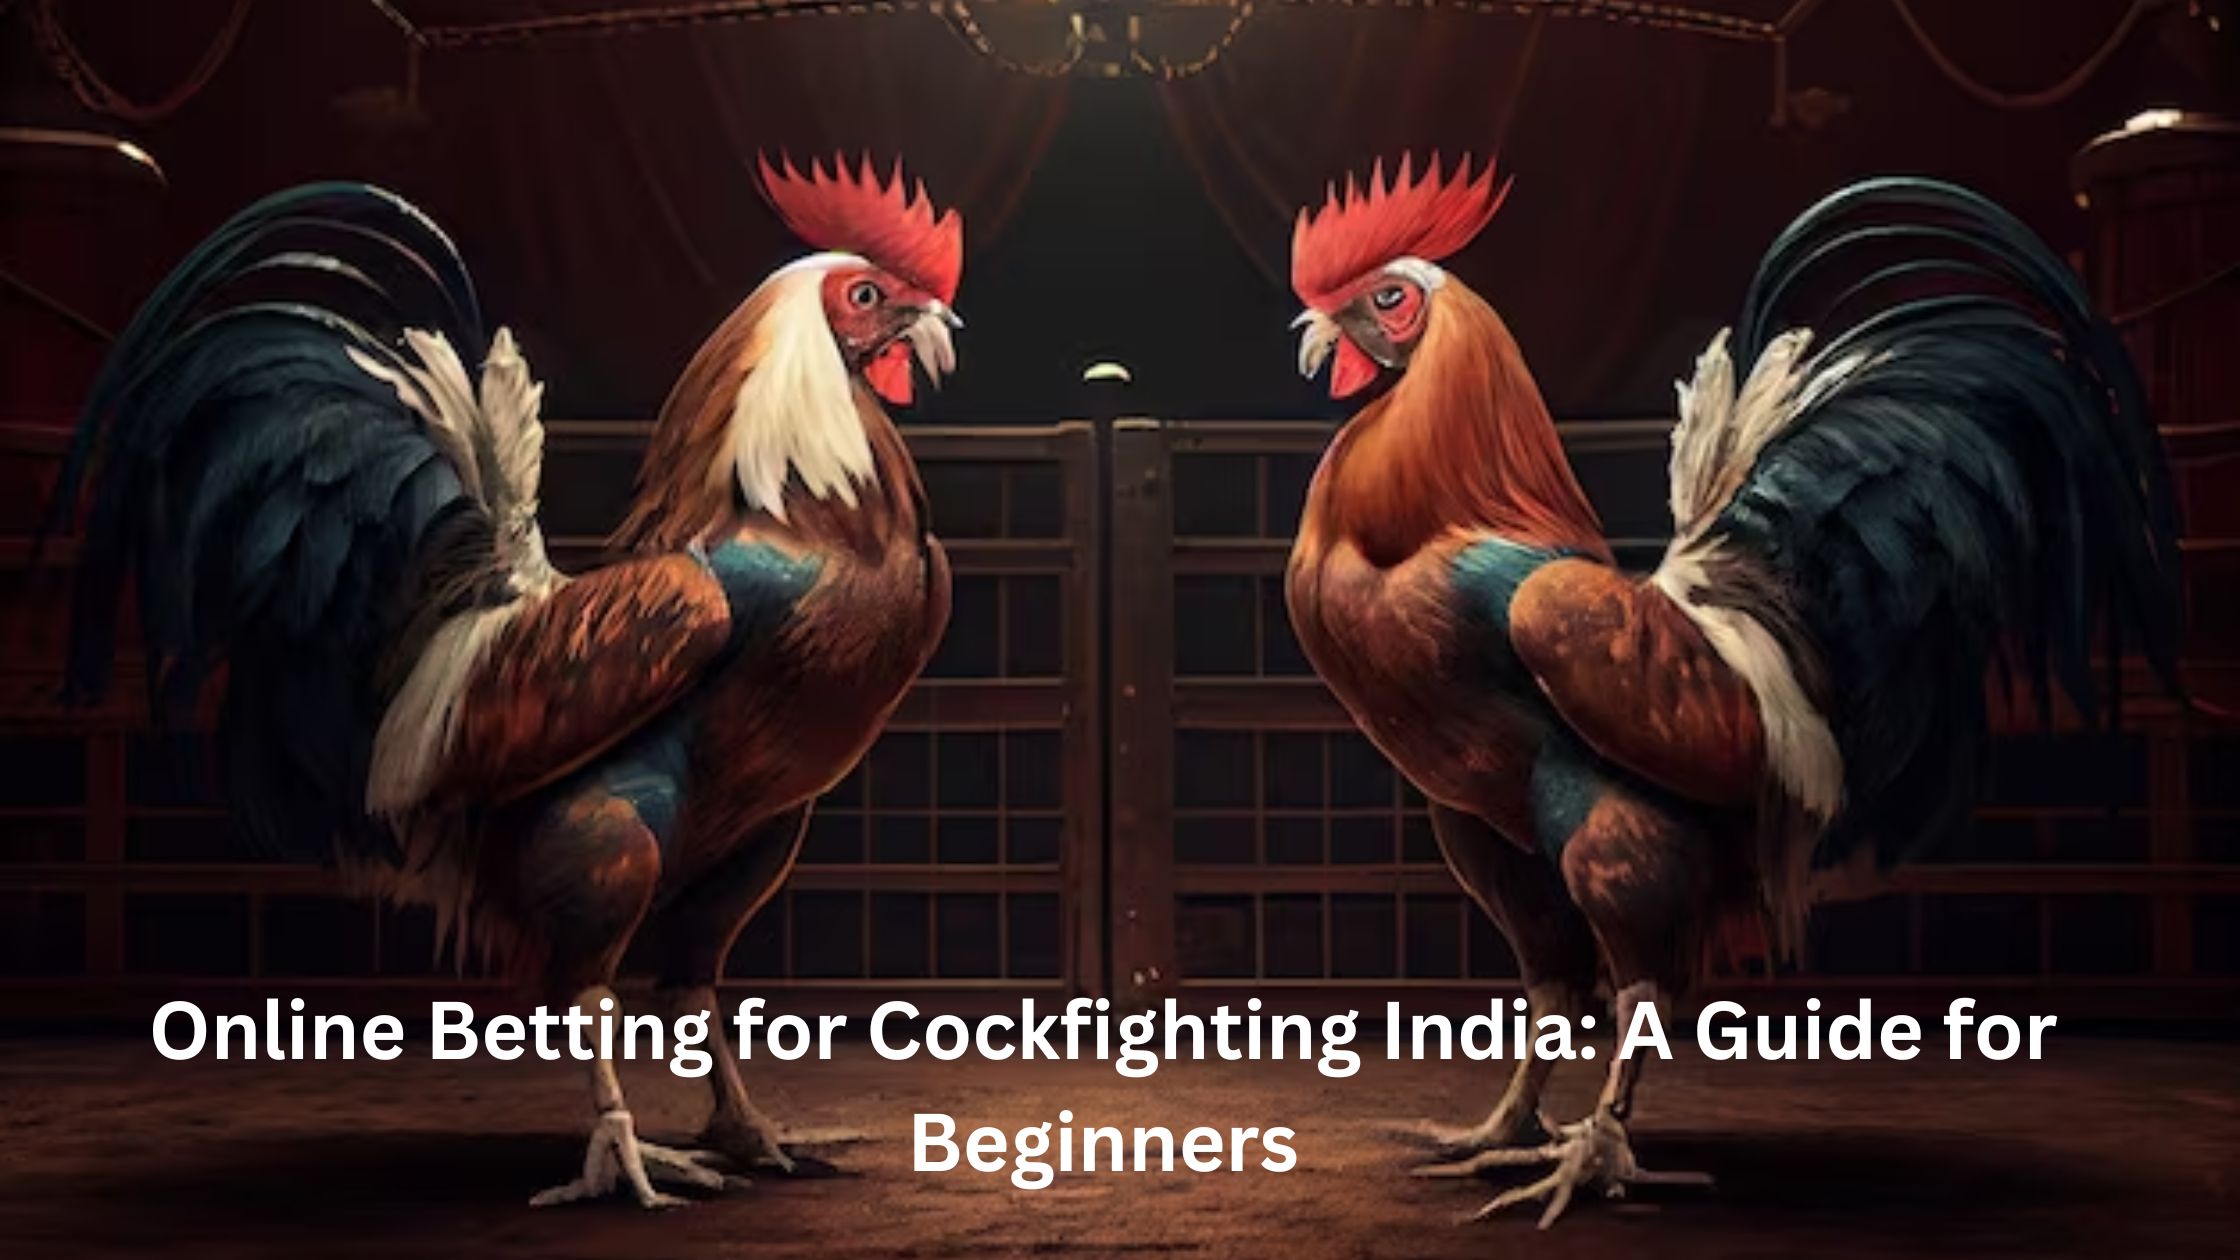 Online Betting for Cockfighting login India: A Guide for Beginners